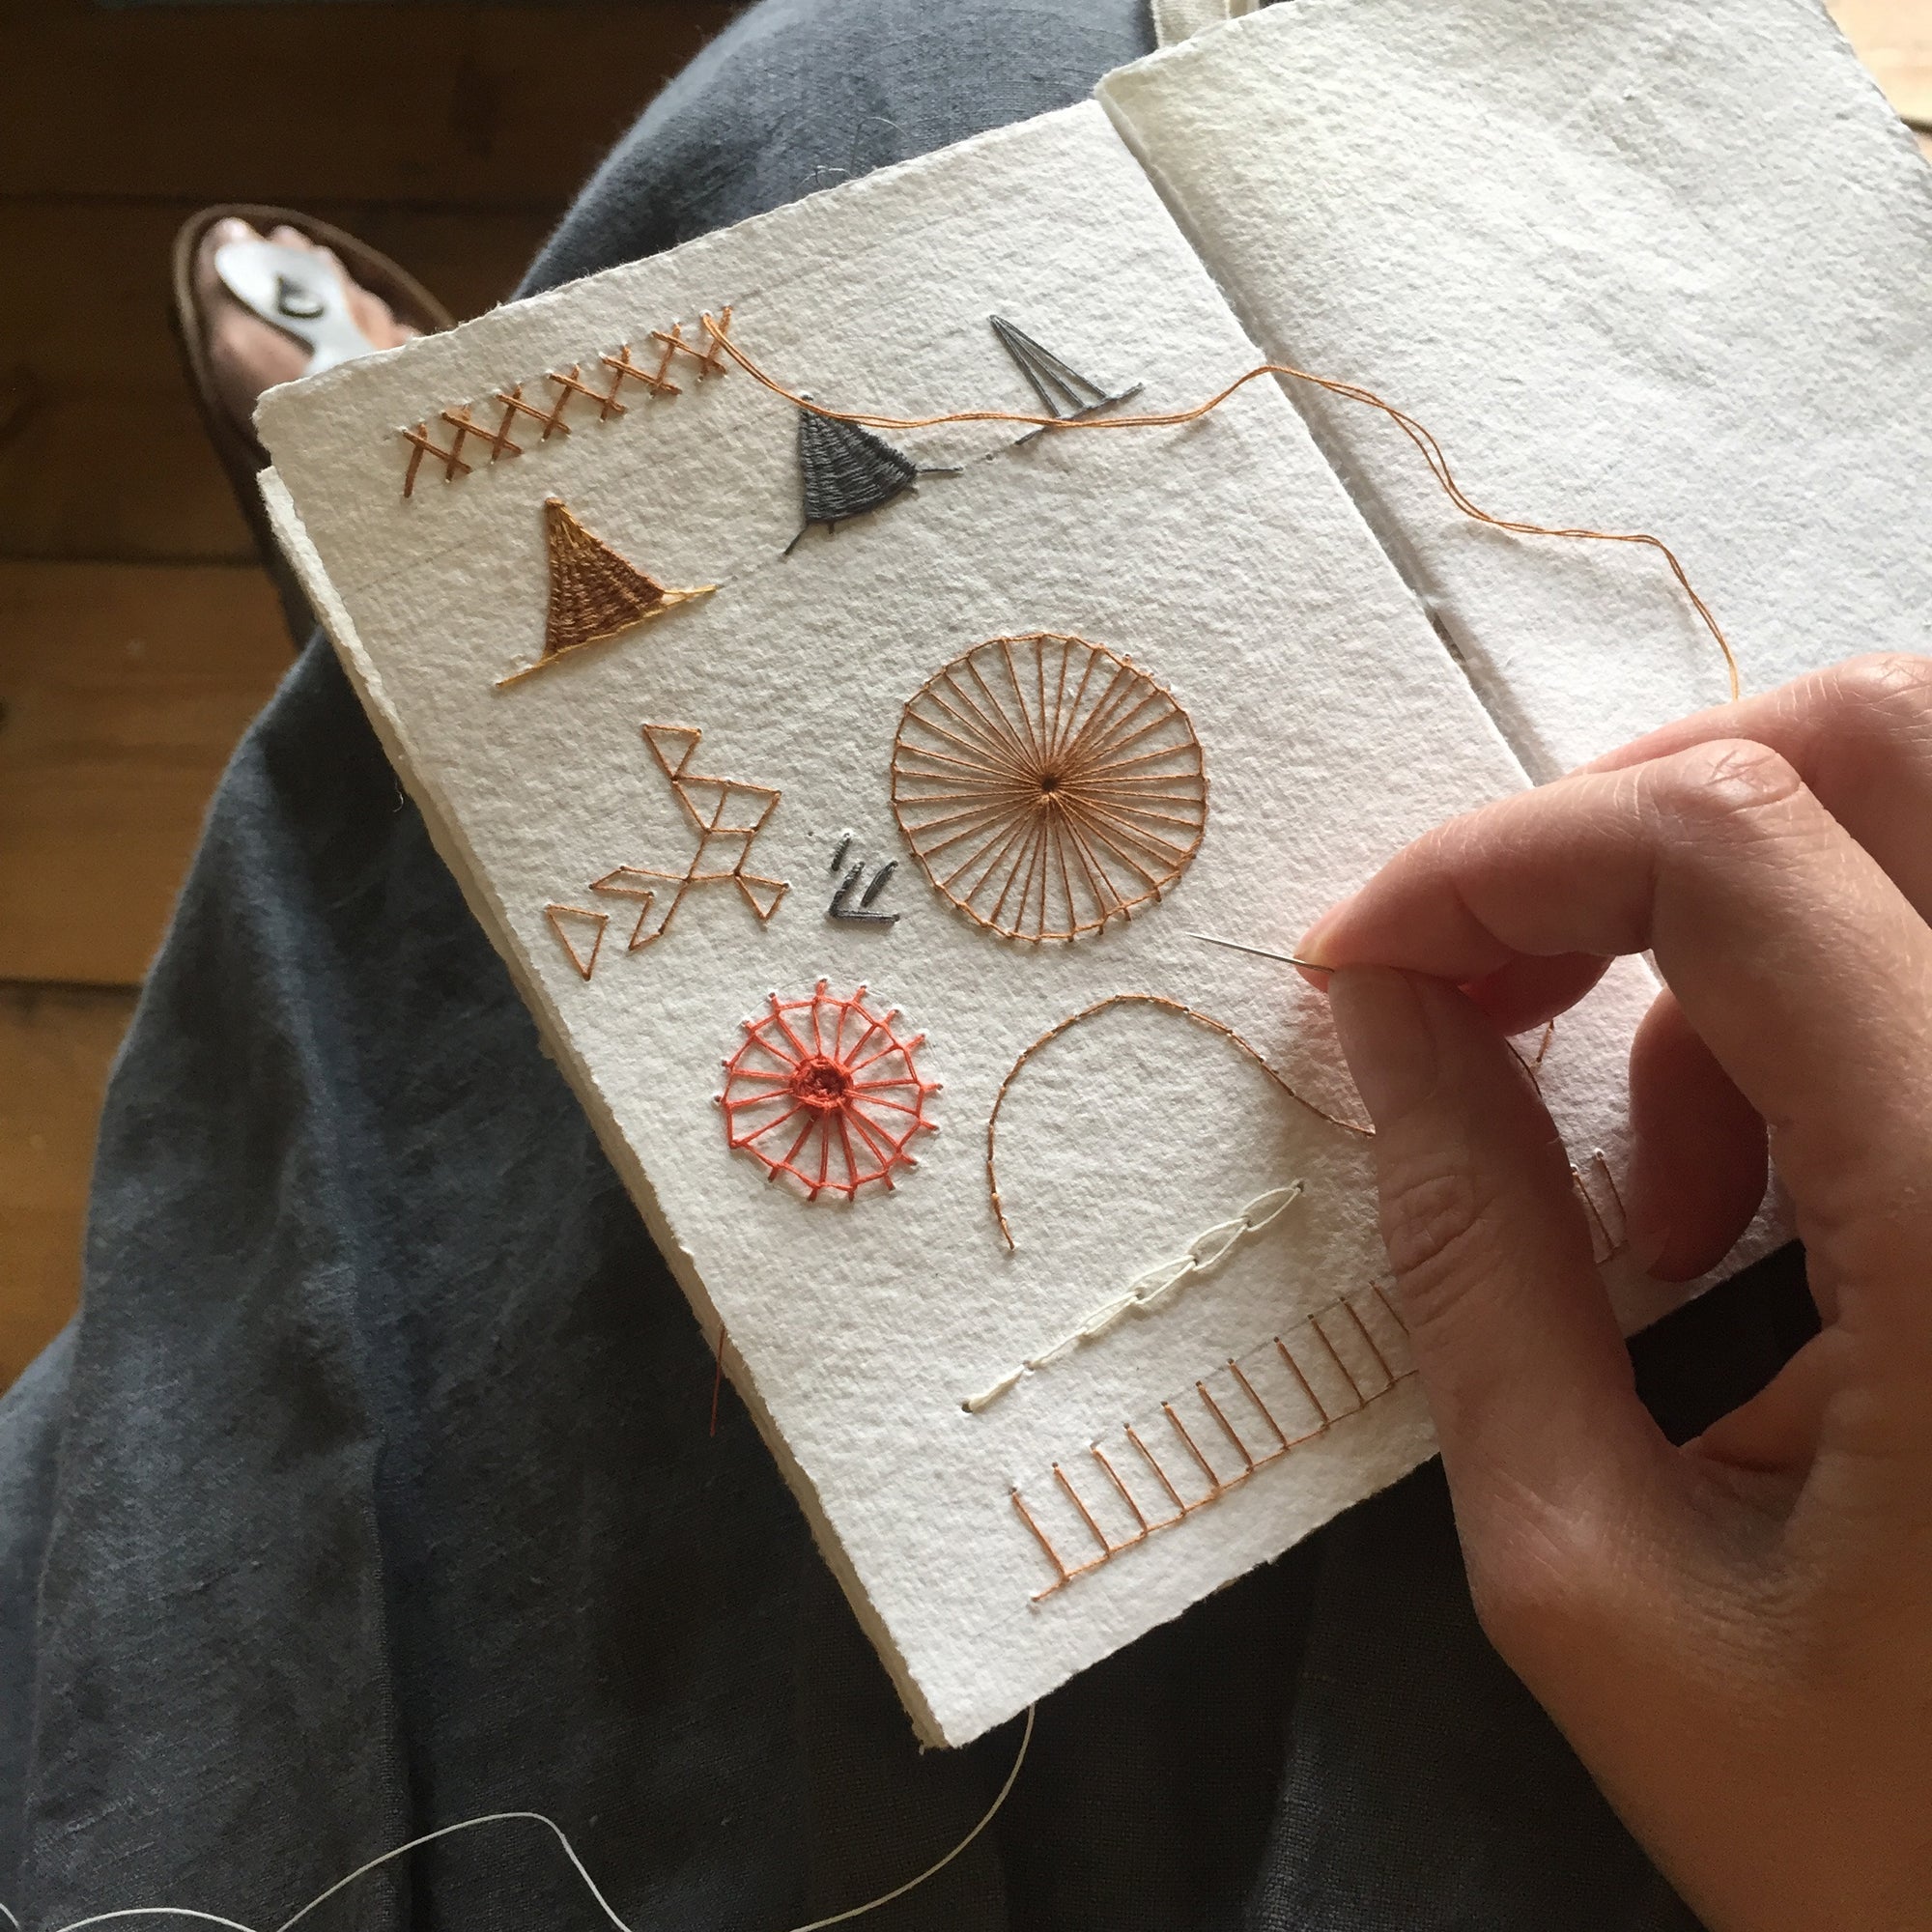 Embroidery stitching on cotton rag paper, one of the many uses for the Wabi Sabi Sketchbooks